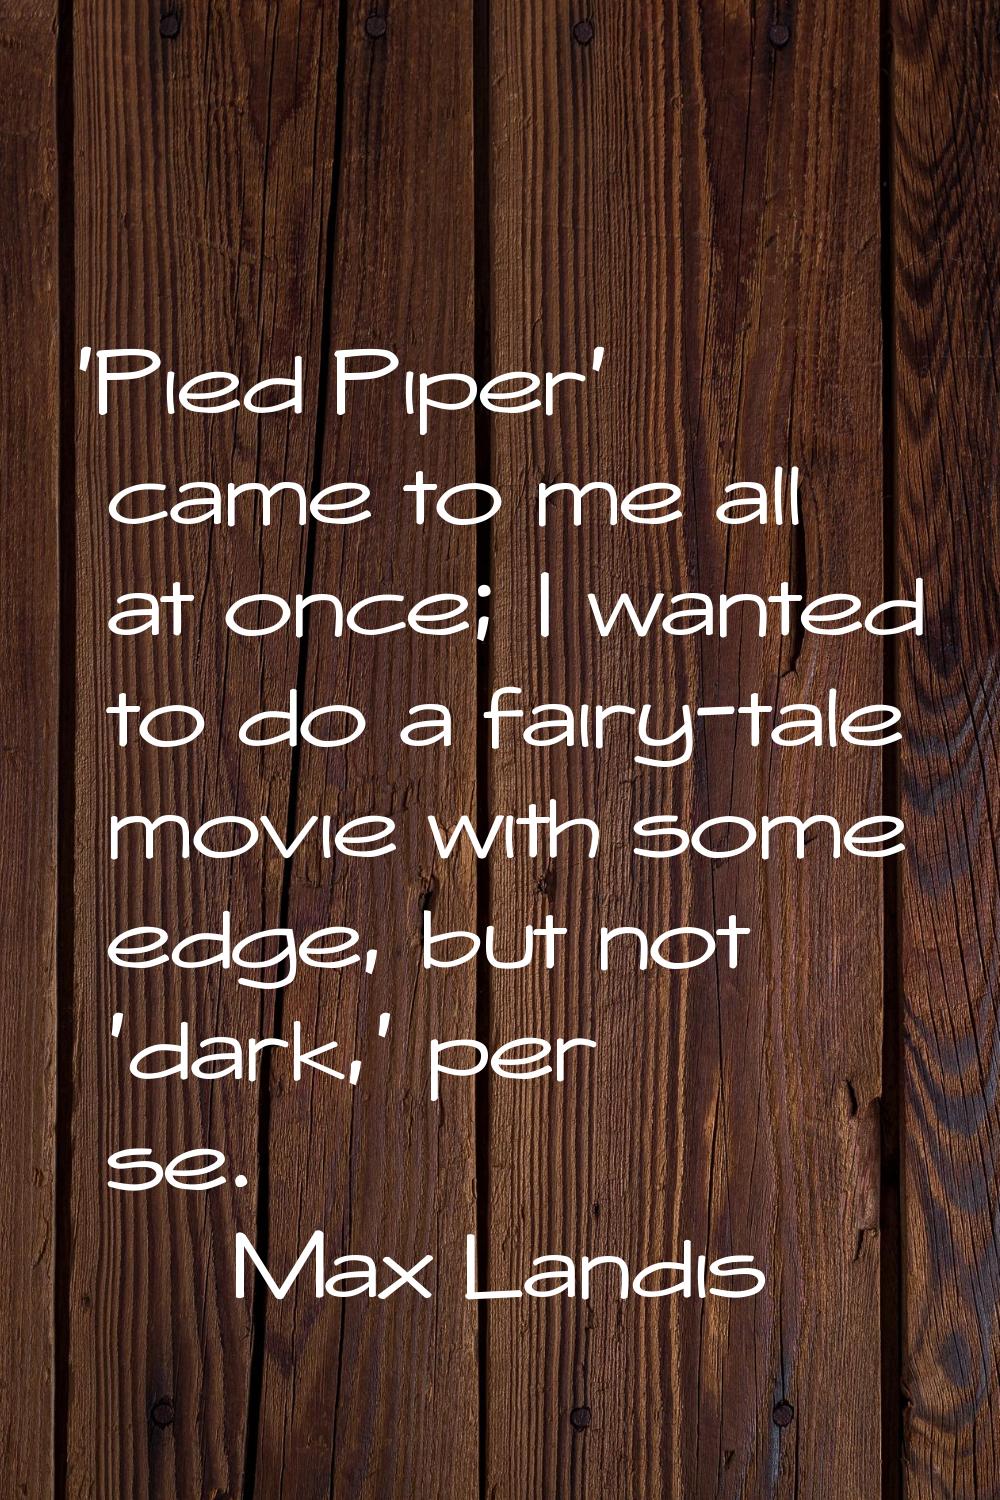 'Pied Piper' came to me all at once; I wanted to do a fairy-tale movie with some edge, but not 'dar